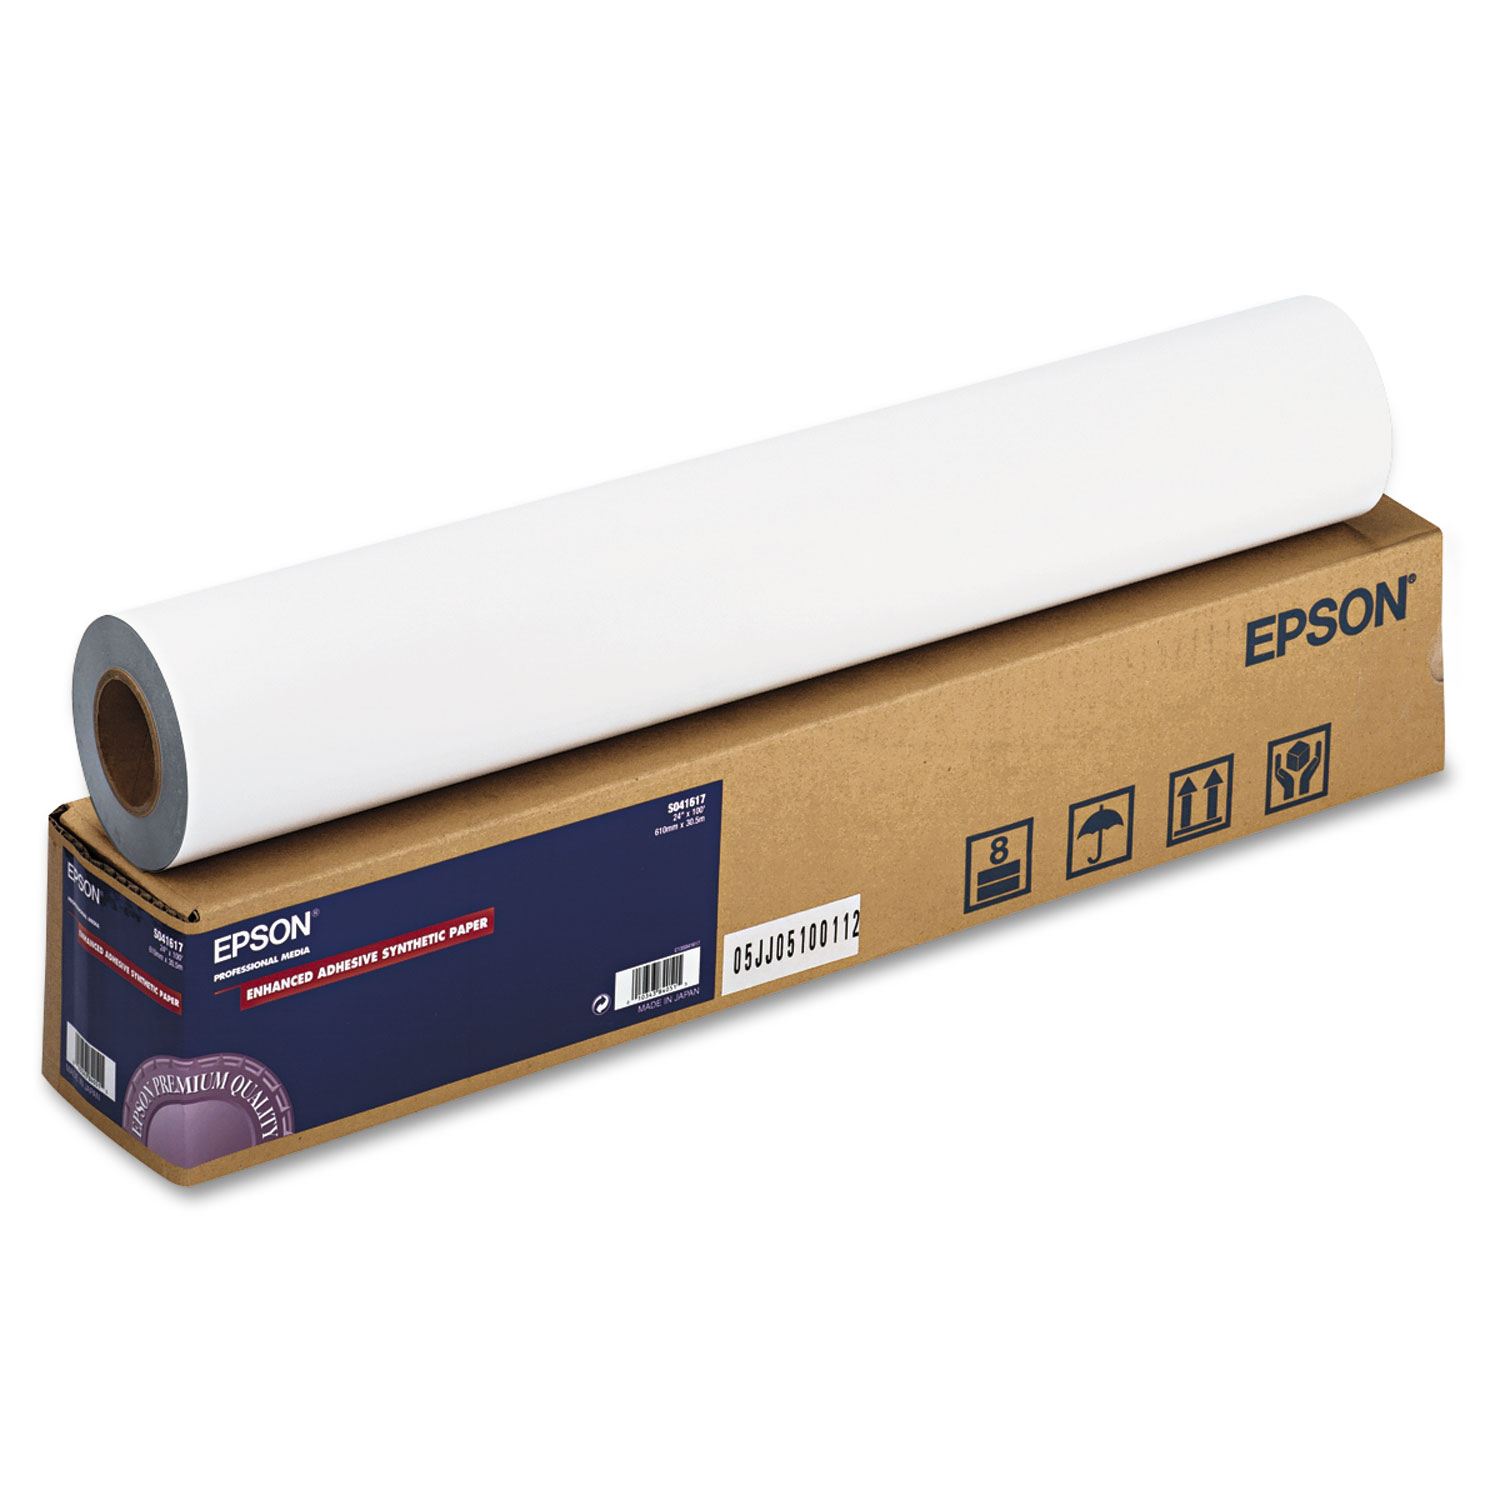  Epson S041617 Enhanced Adhesive Synthetic Paper, 2 Core, 24 x 100 ft, Matte White (EPSS041617) 